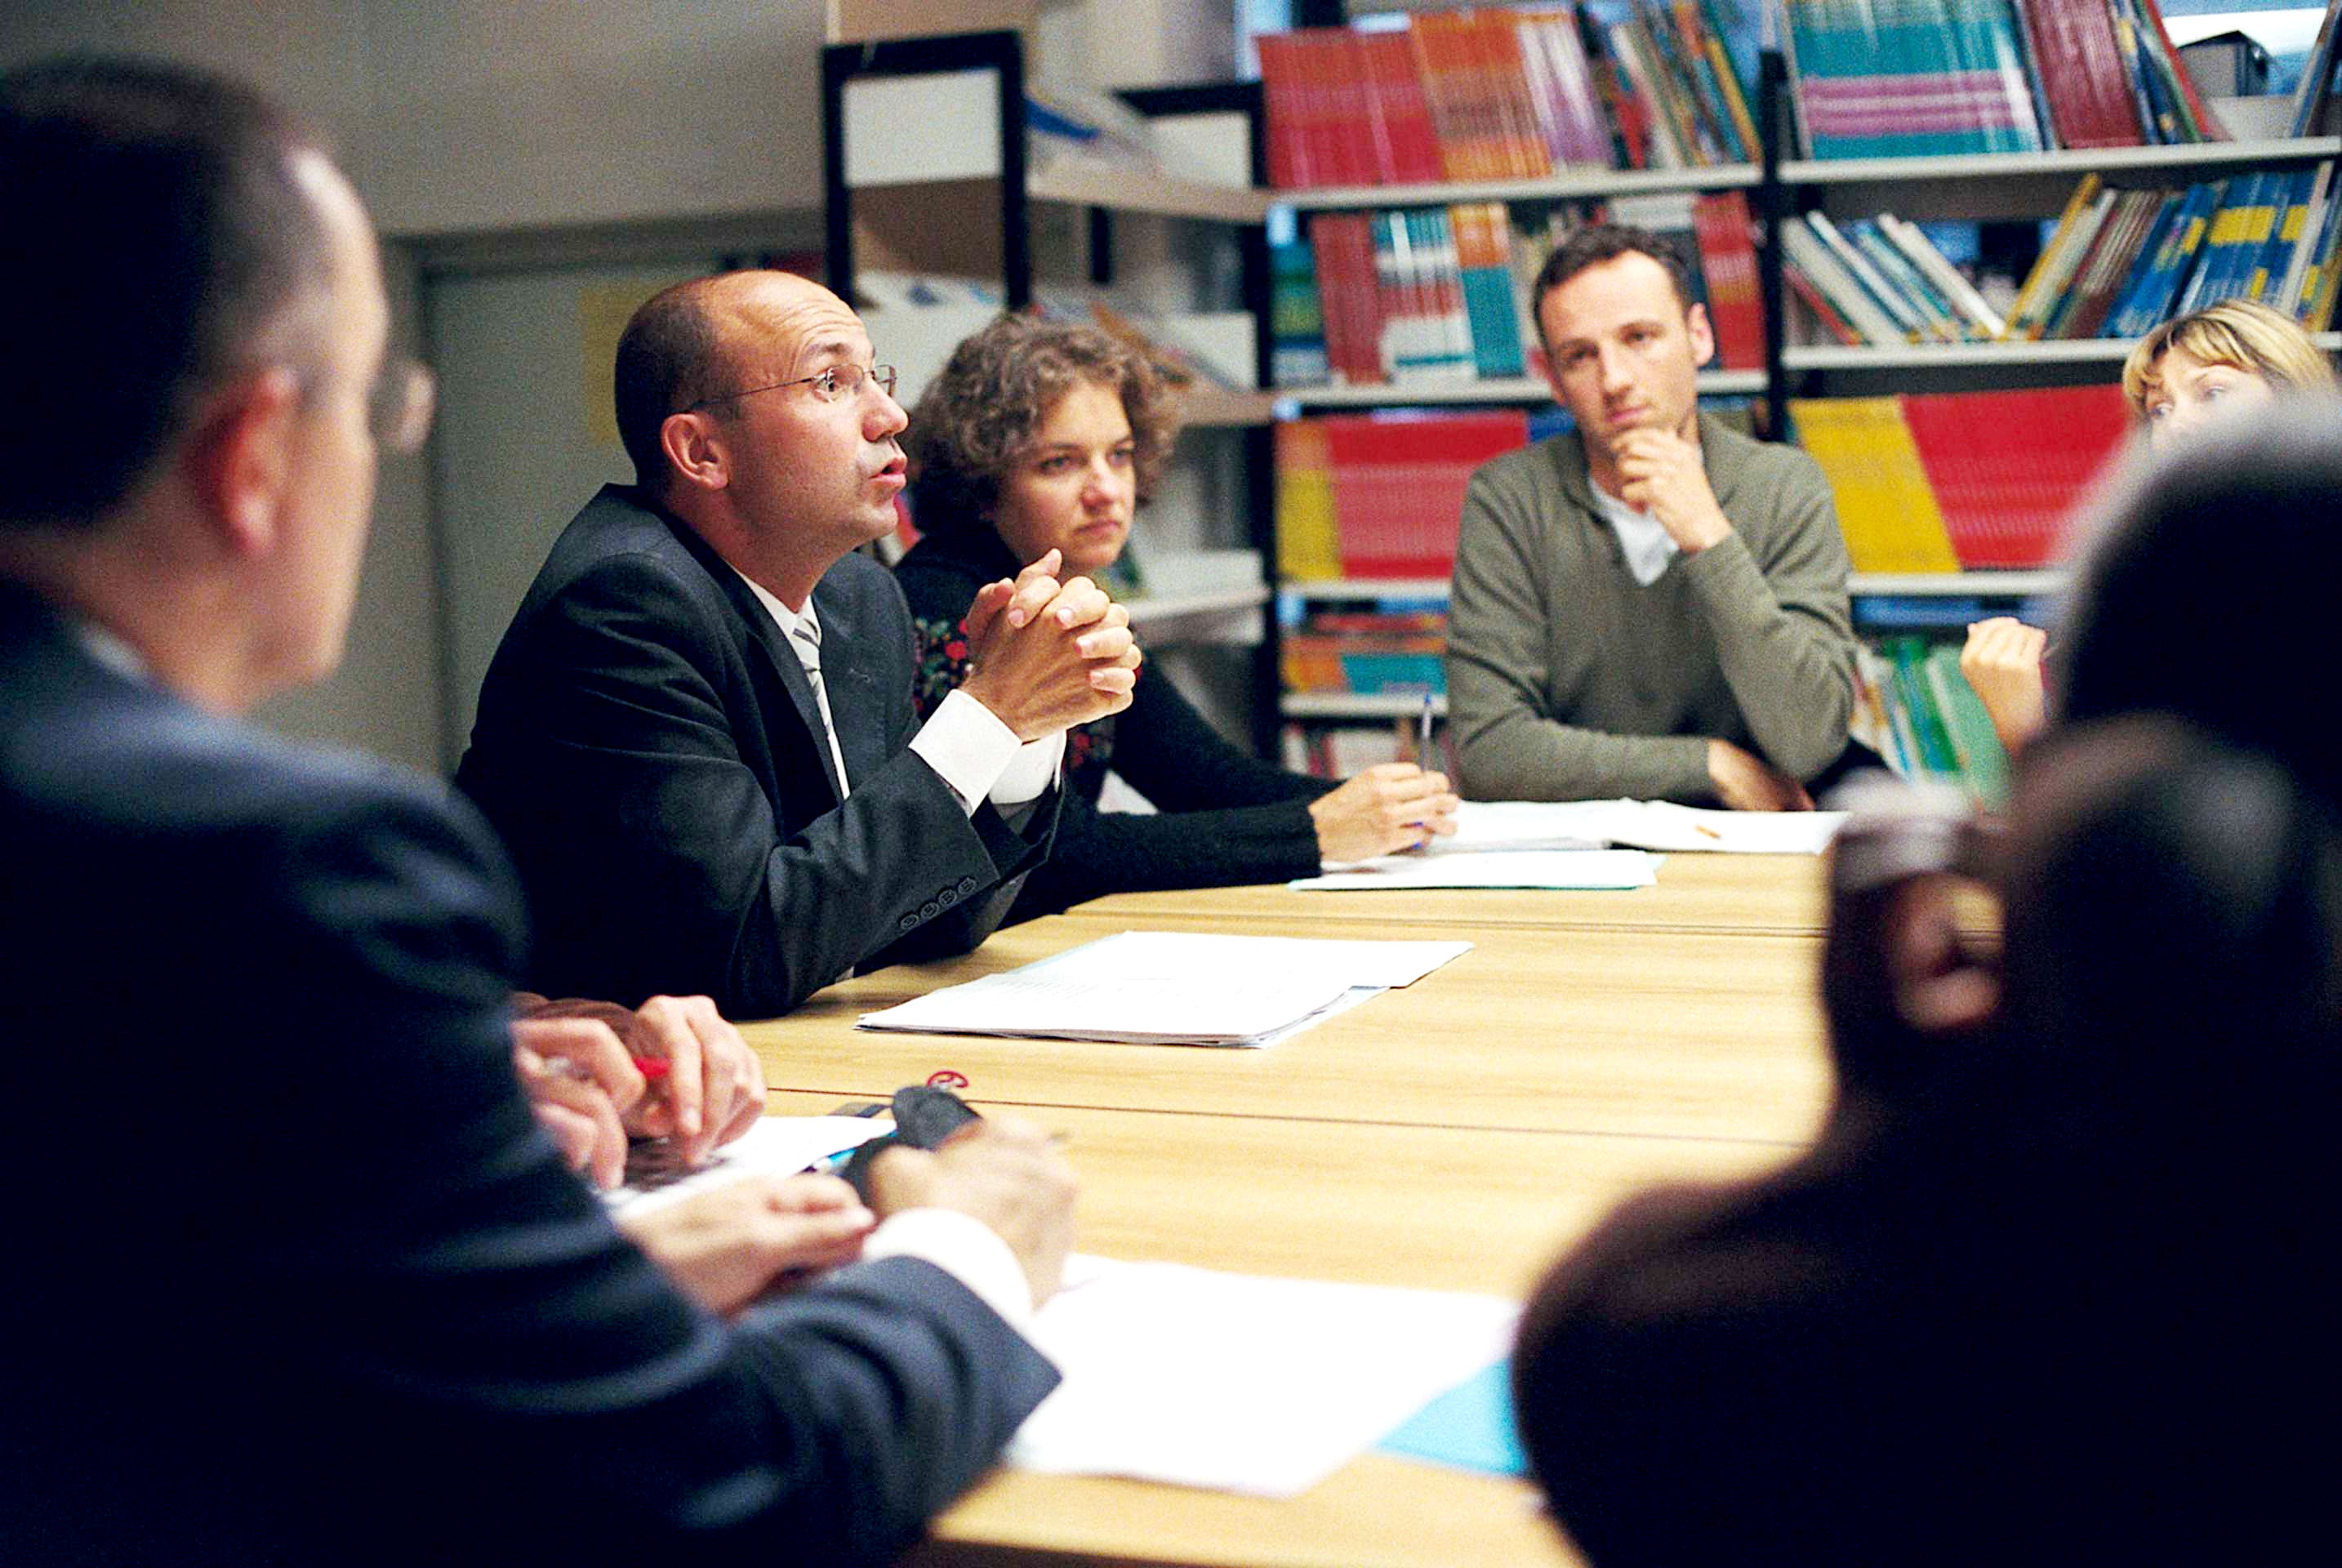 Jean-Michel Simonet stars as the Principle, teacher and Francois Begaudeau stars as Francois in Sony Pictures Classics' The Class (2008). Photo credit by Pierre Milon.